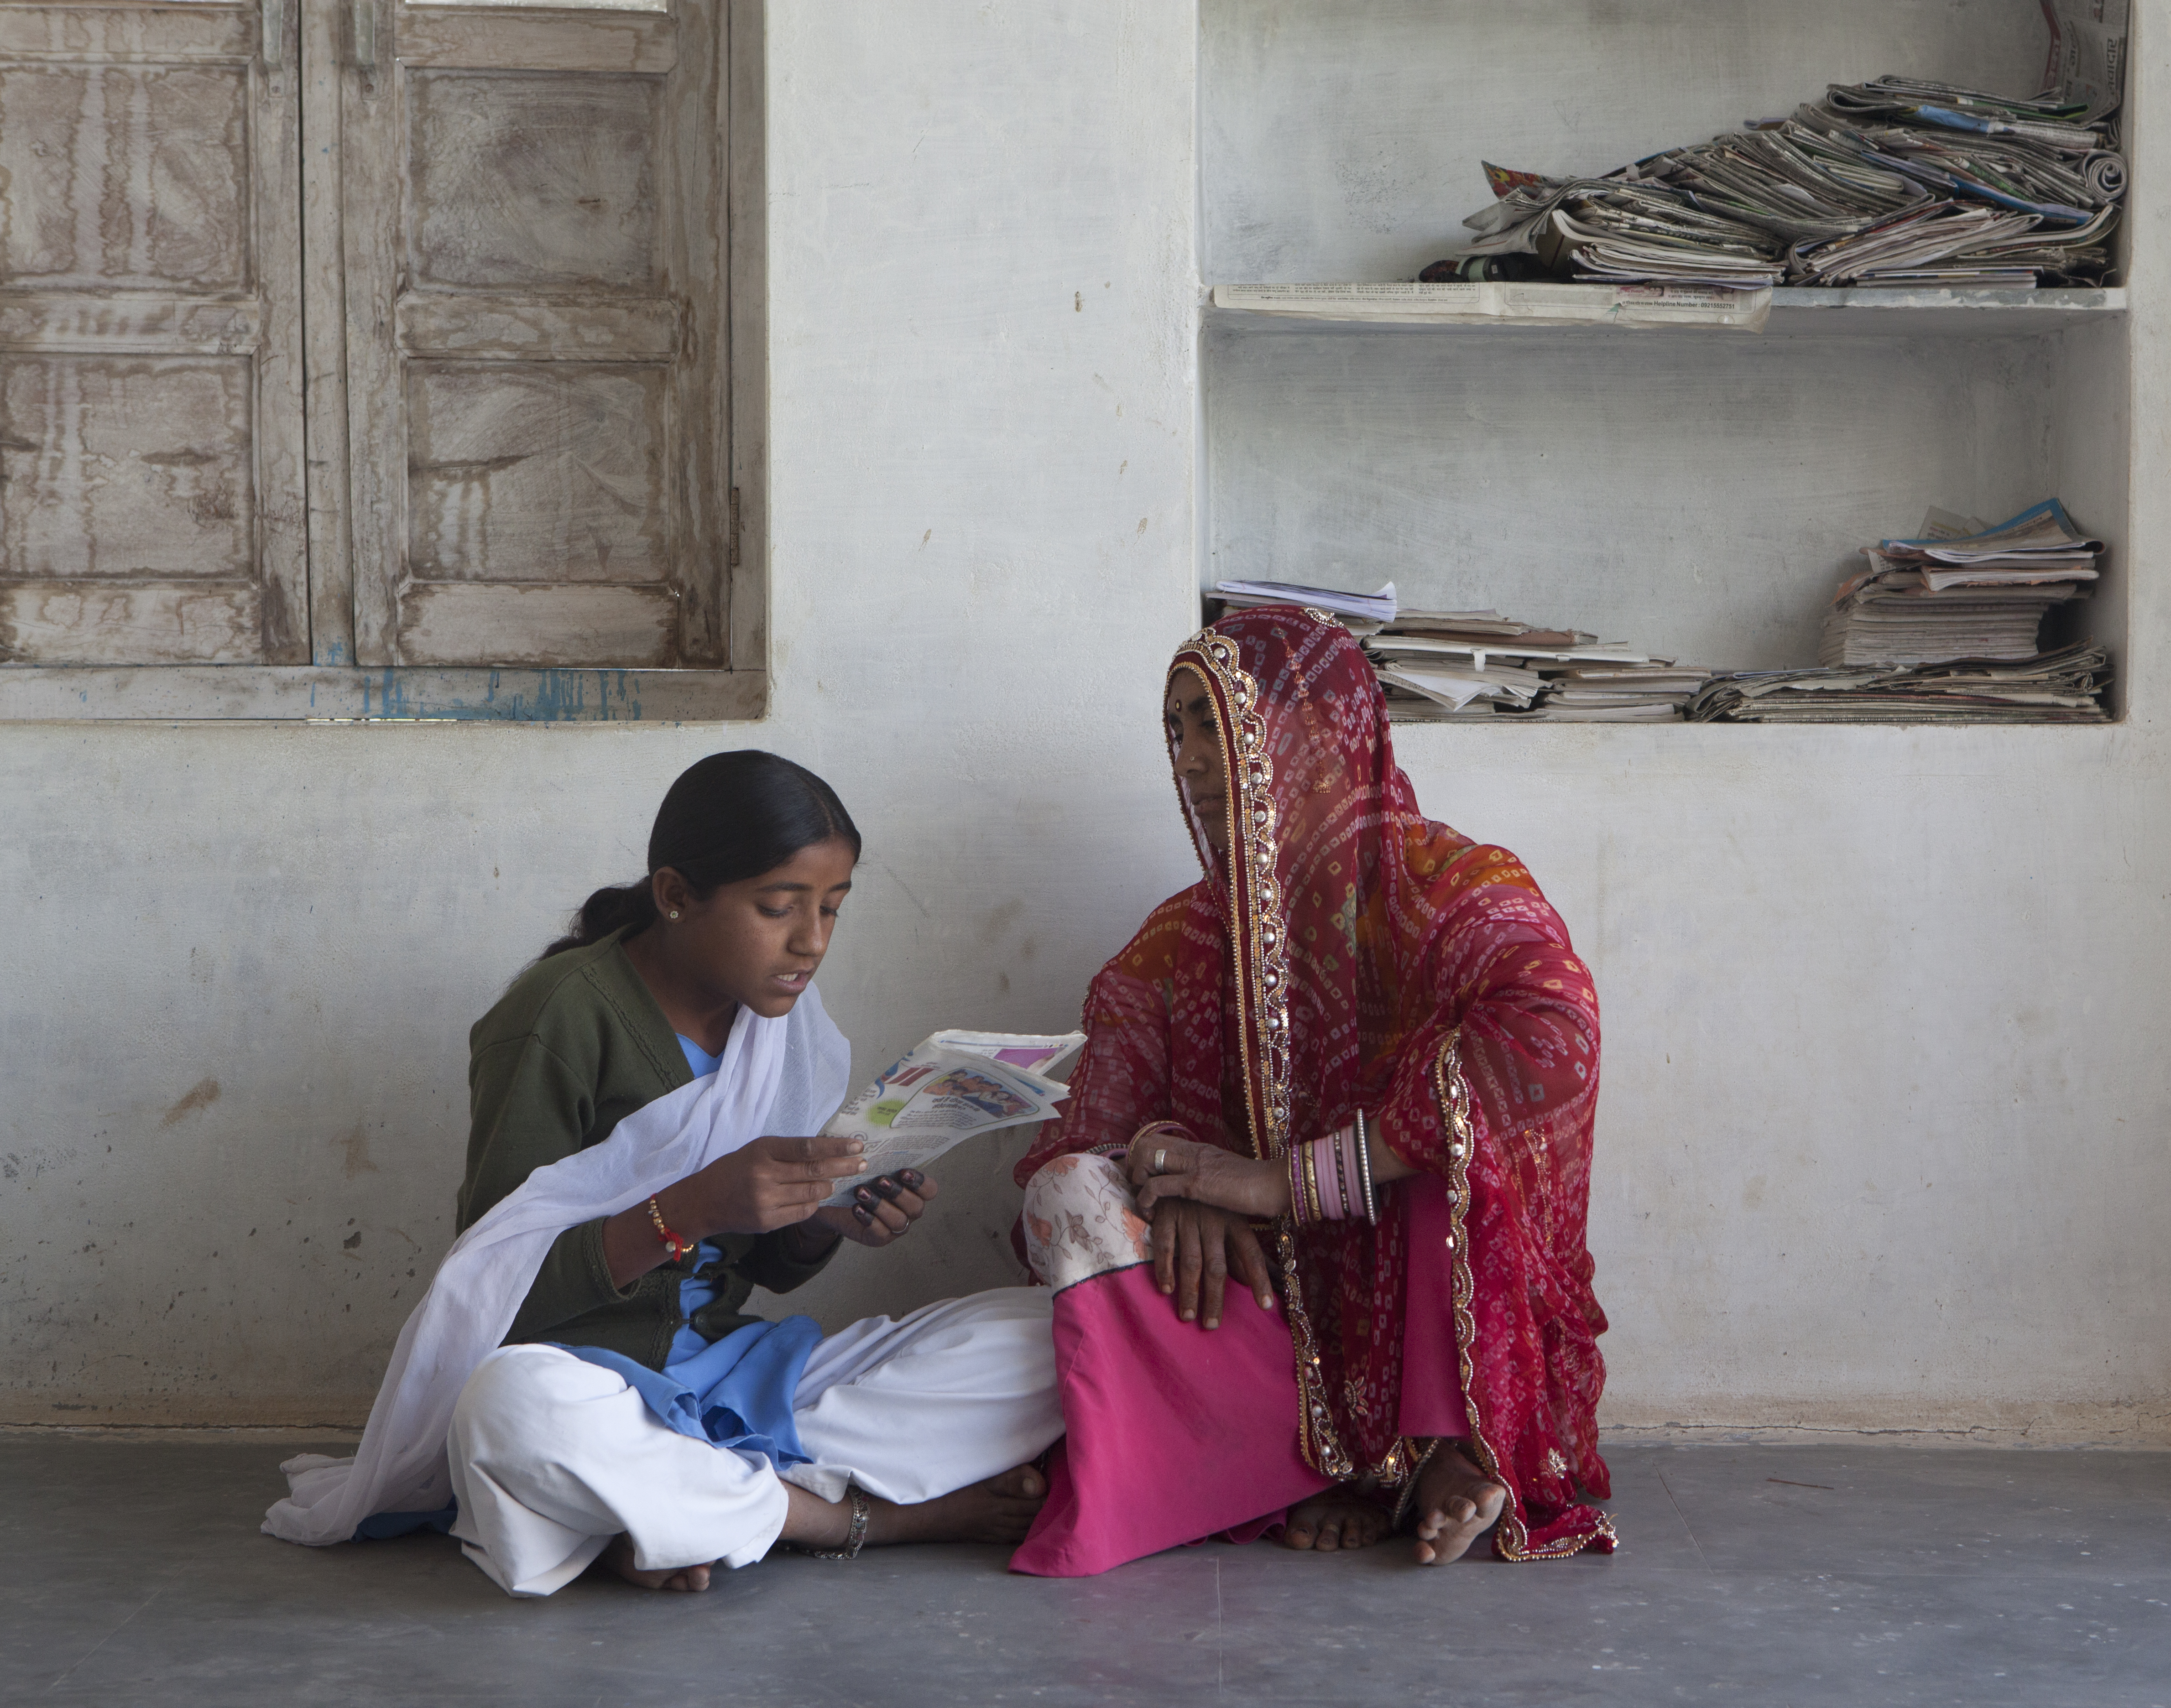 Chaddi reads to her mother by Mark Tuschman